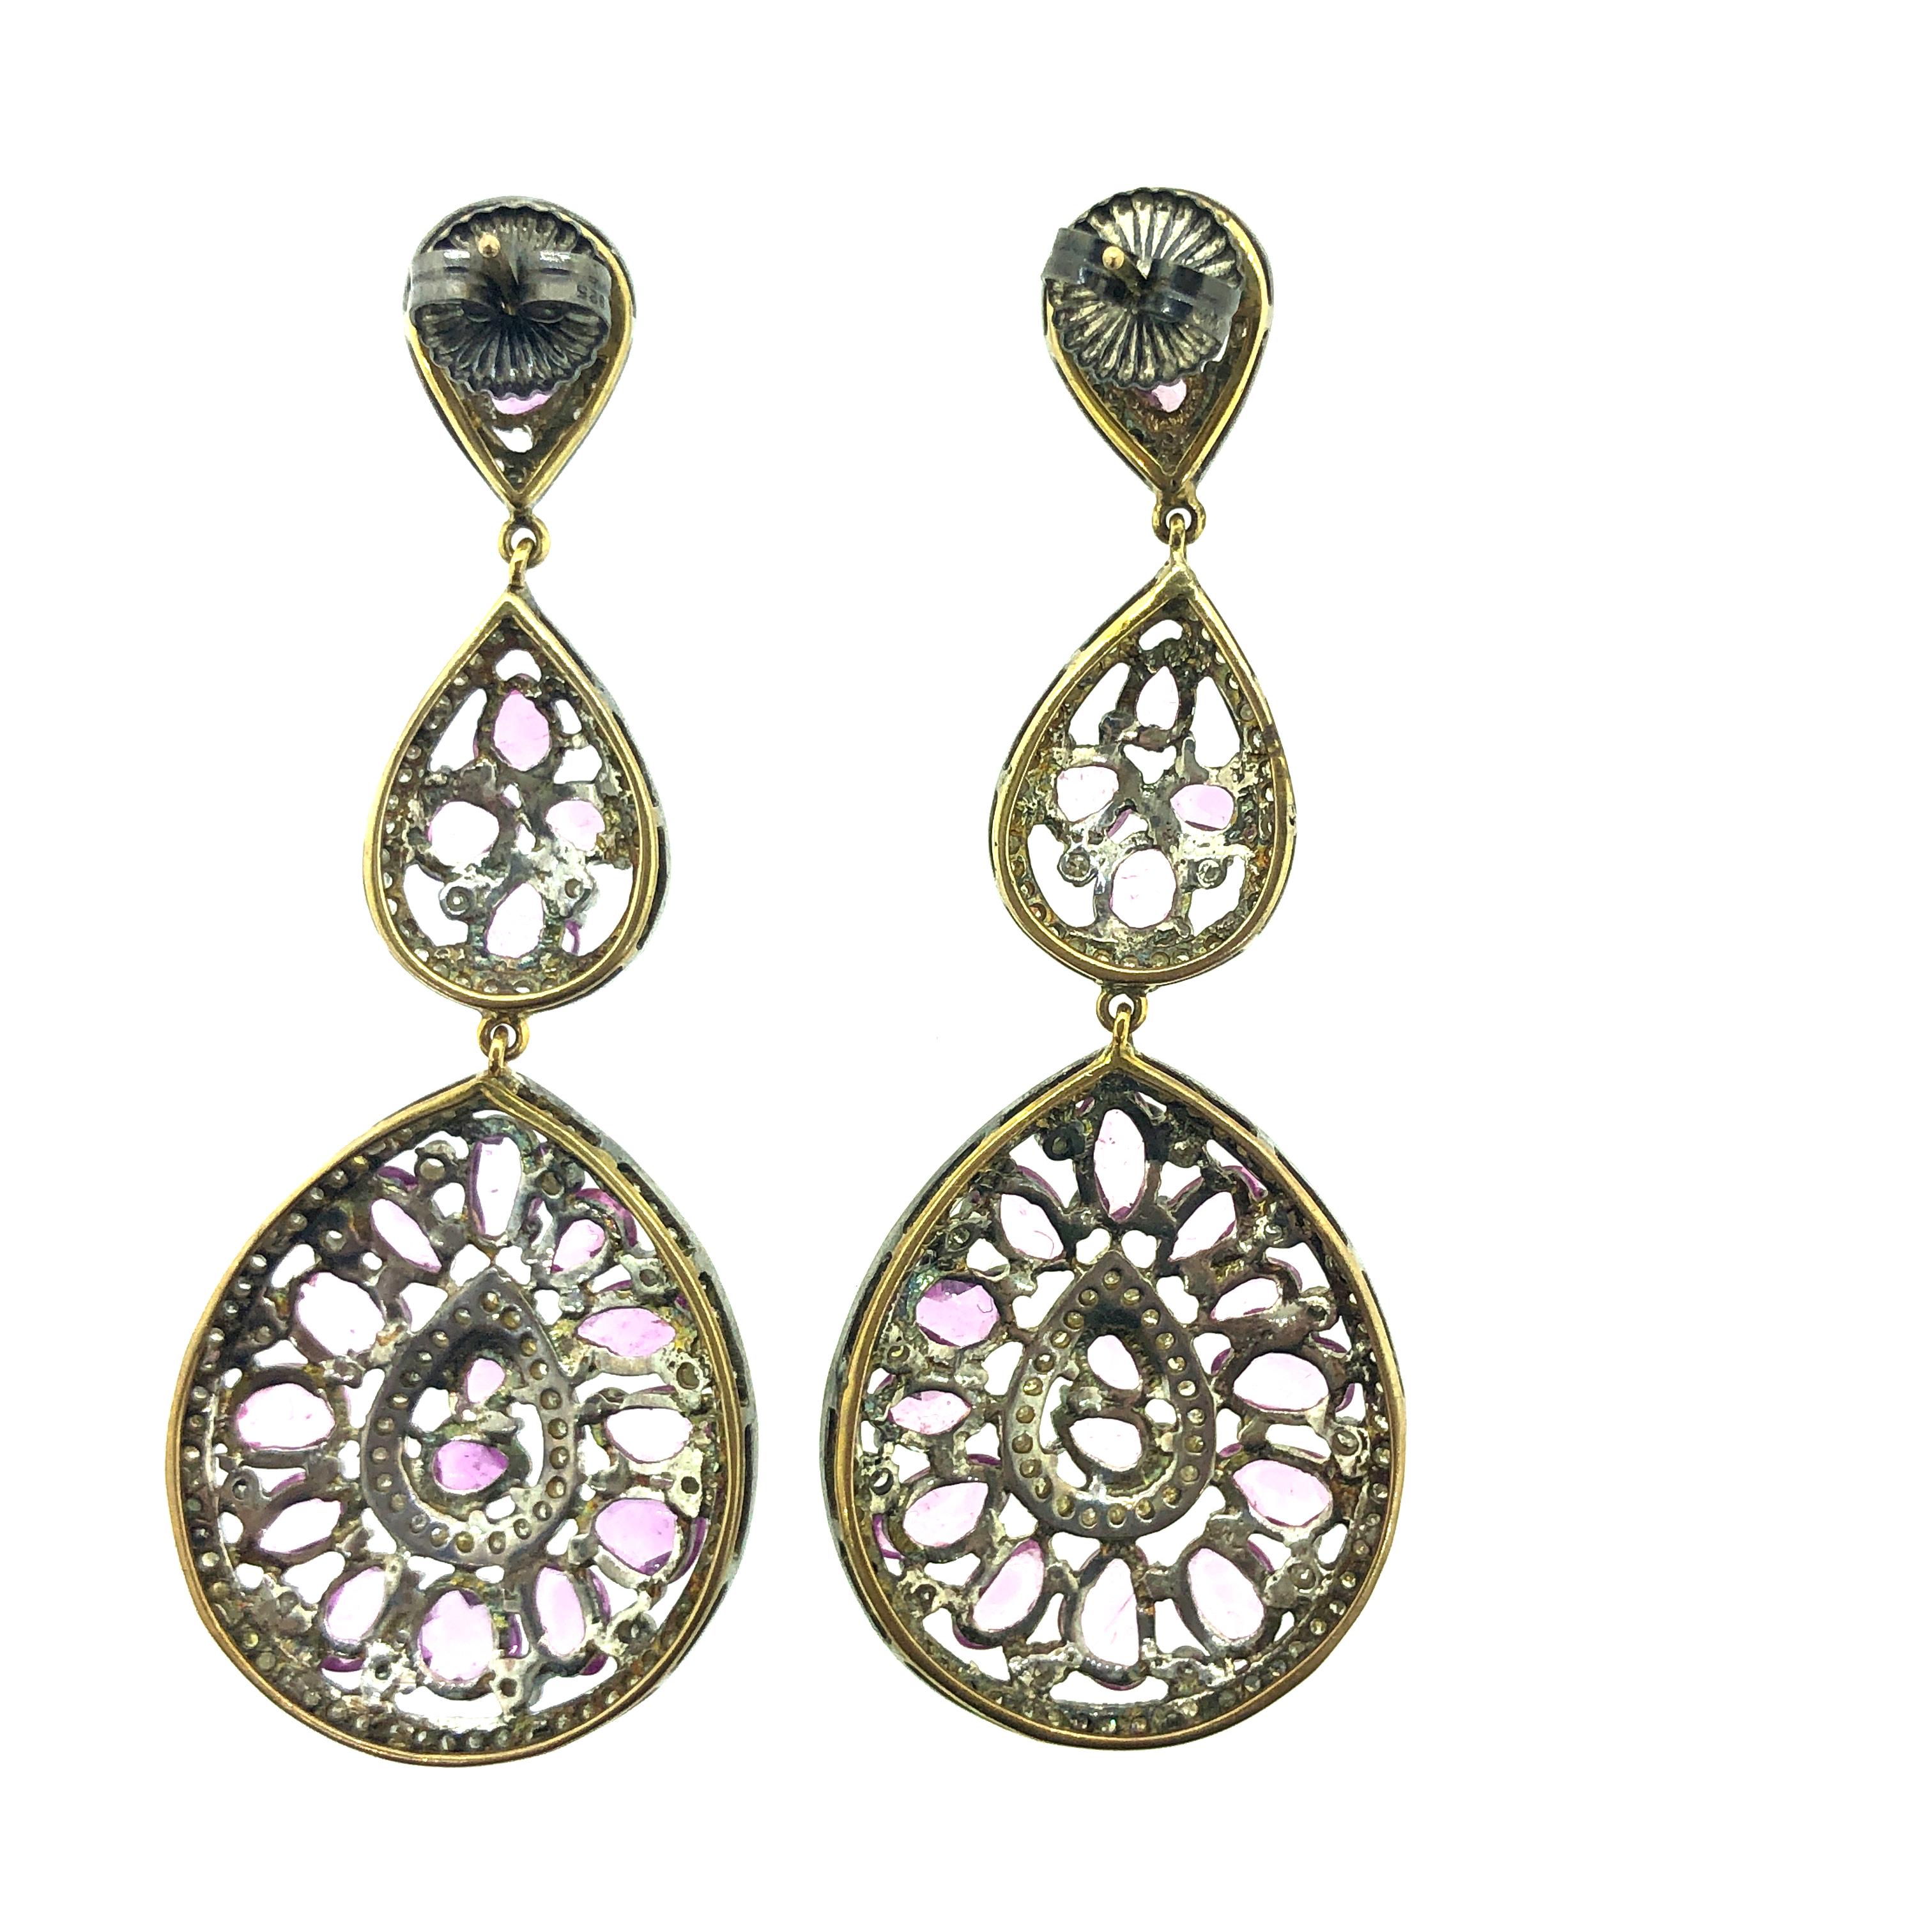 Contemporary 20.01 Carat Pink Sapphire, Diamond Earring Oxidized Sterling Silver, 14K Gold For Sale